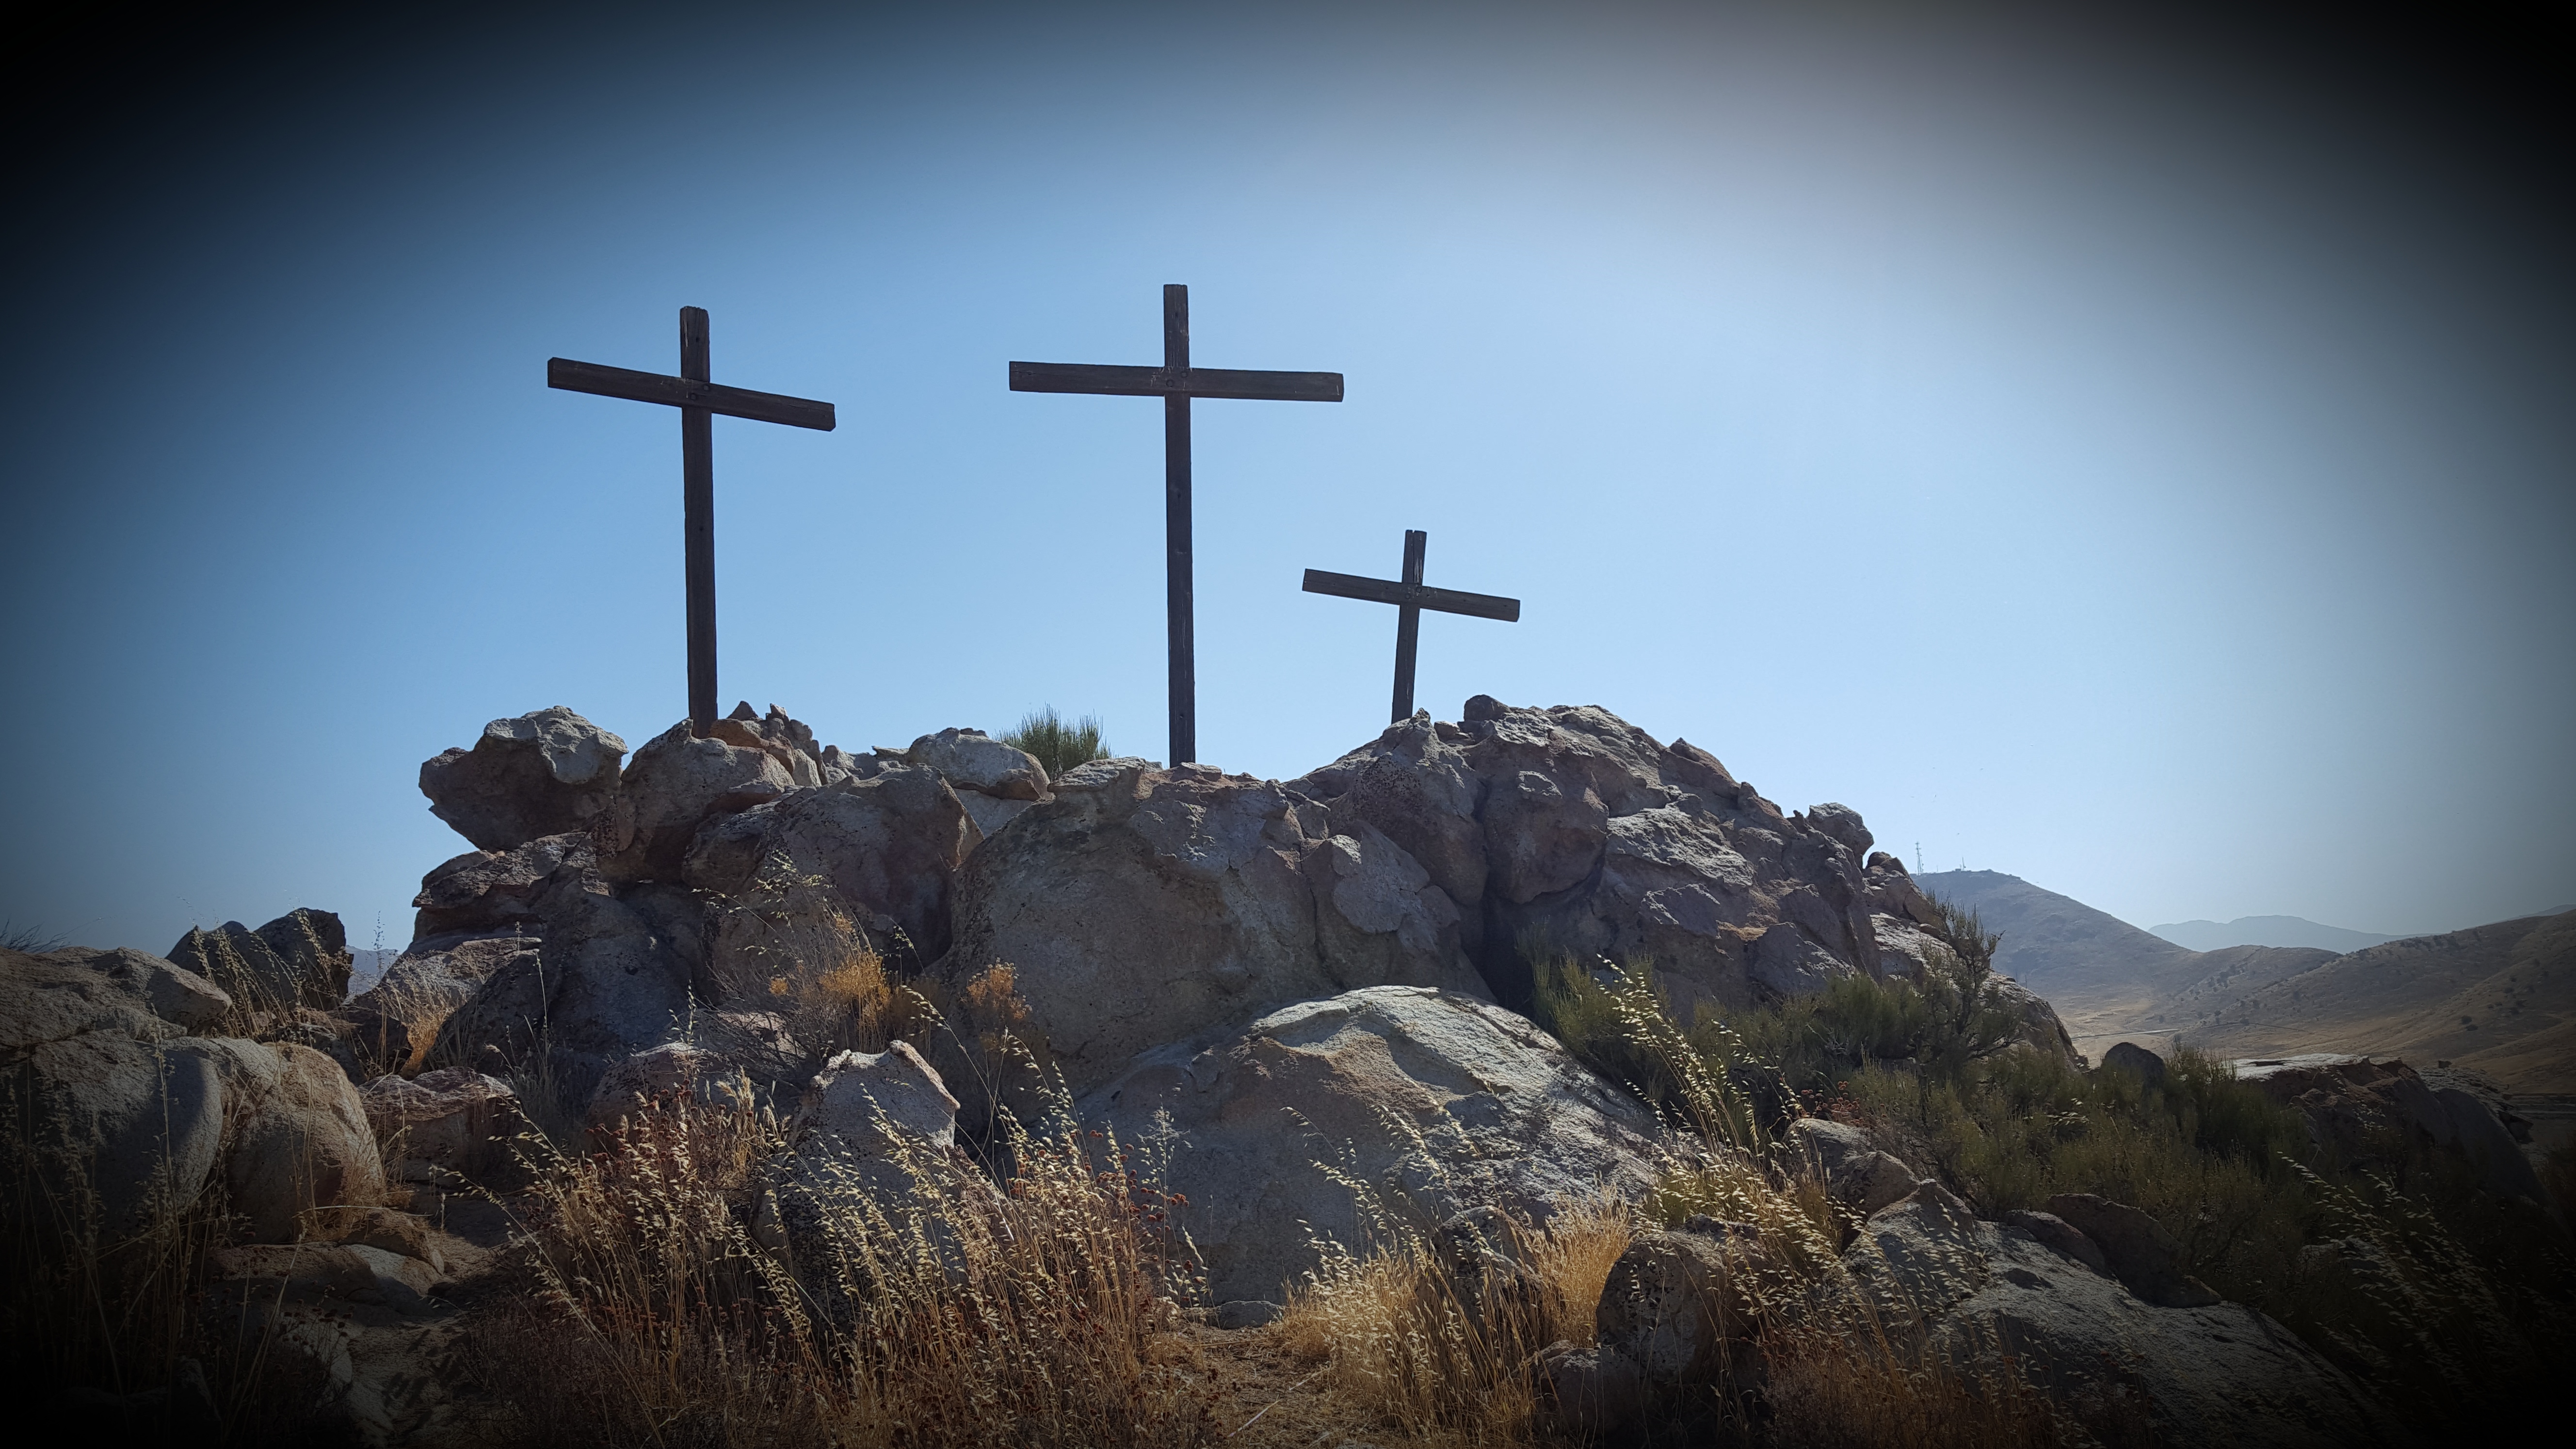 The three crosses represent the memorial for the Keyesville Massacre. The crosses are set a few miles away from the actual site, due to dangers trying to reach the site.